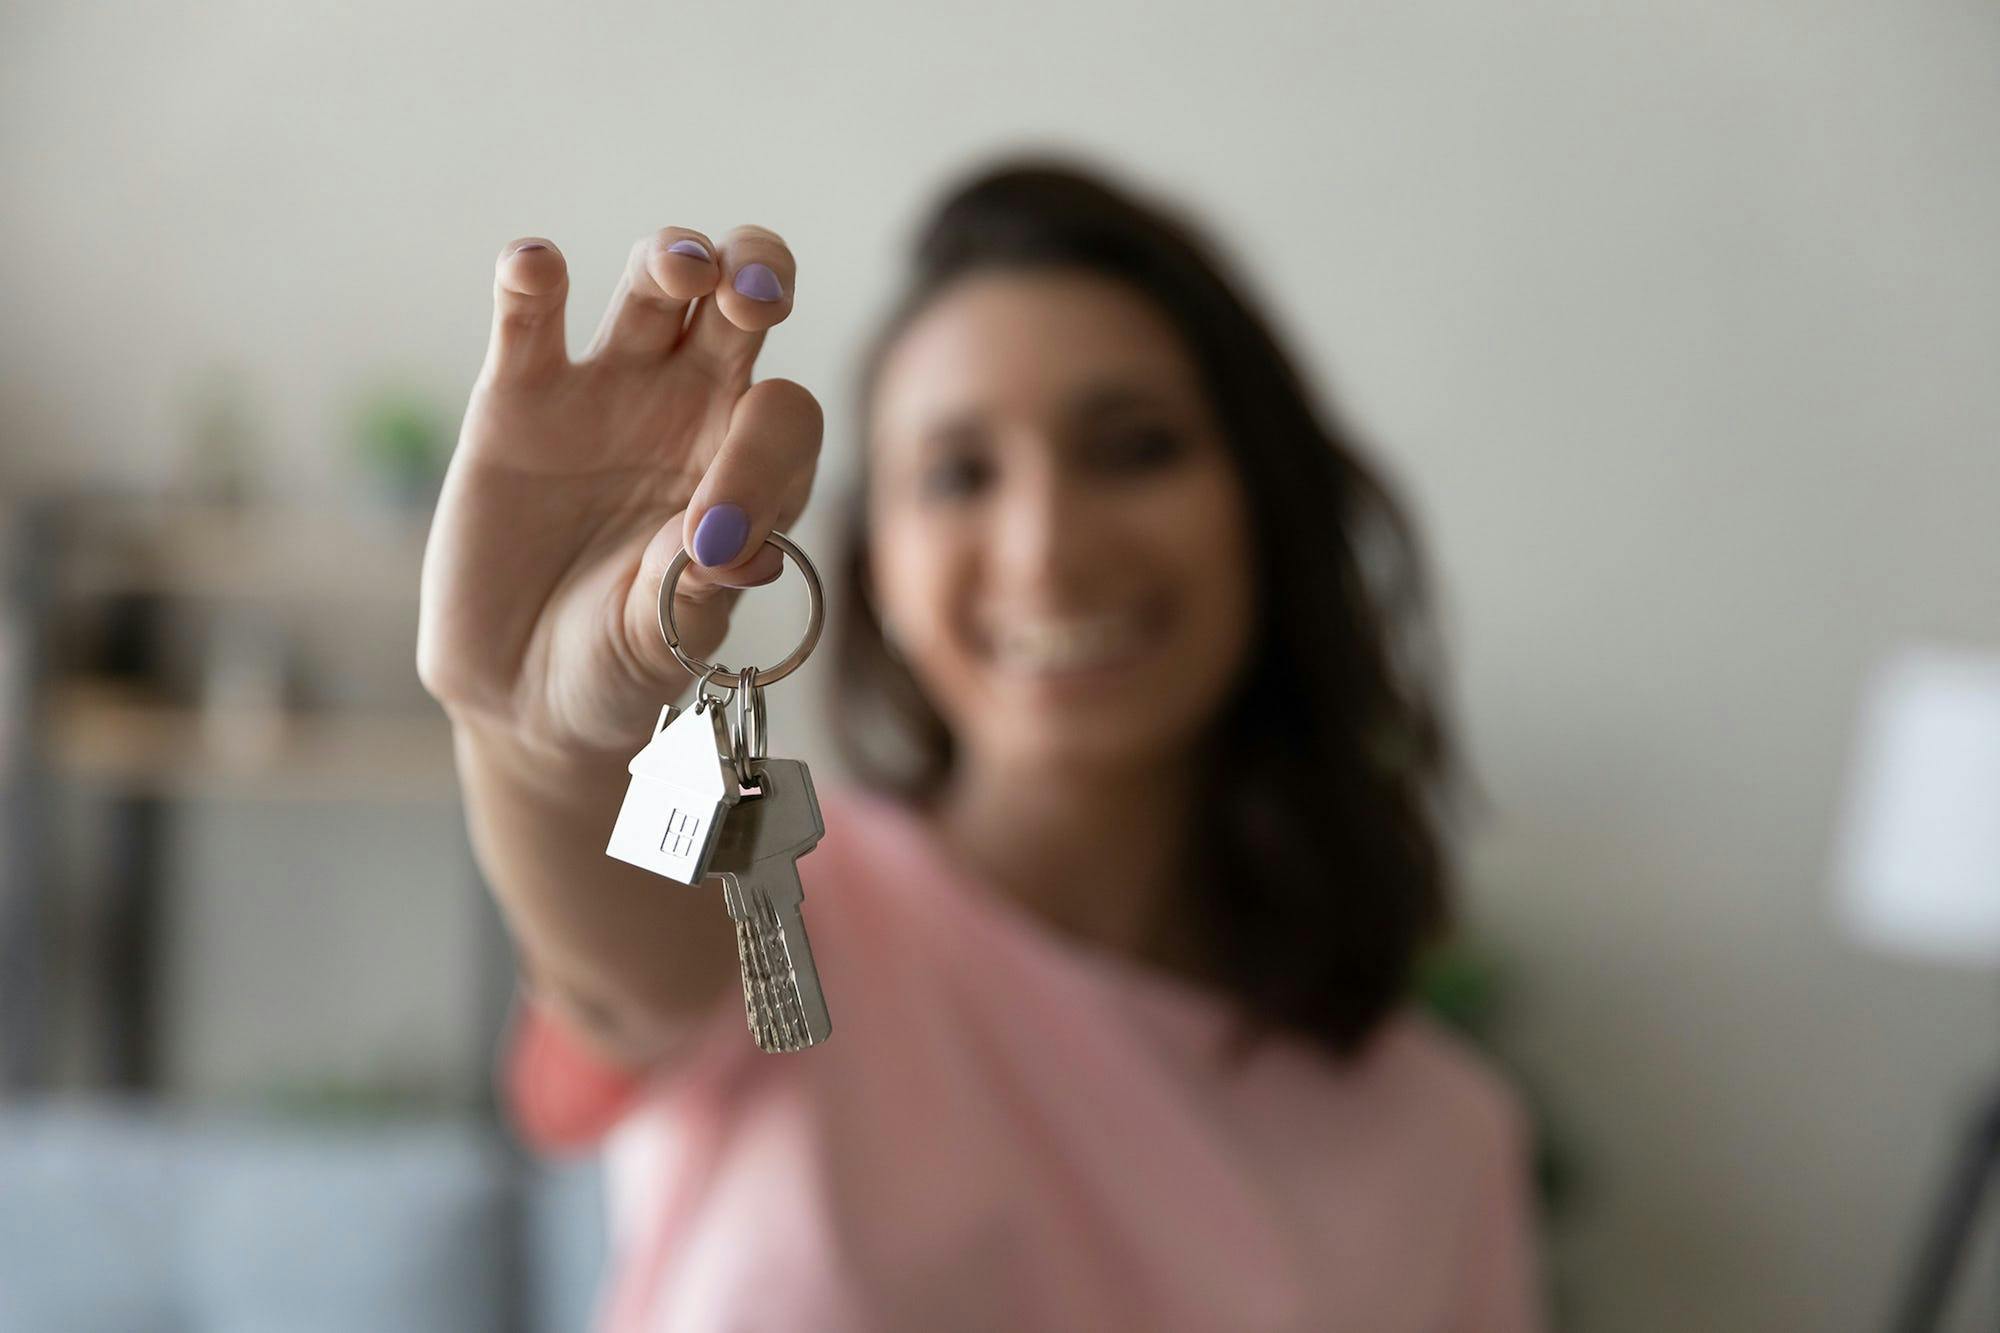 Woman holding keys to rental property and smiling, taking a human approach to renting out property